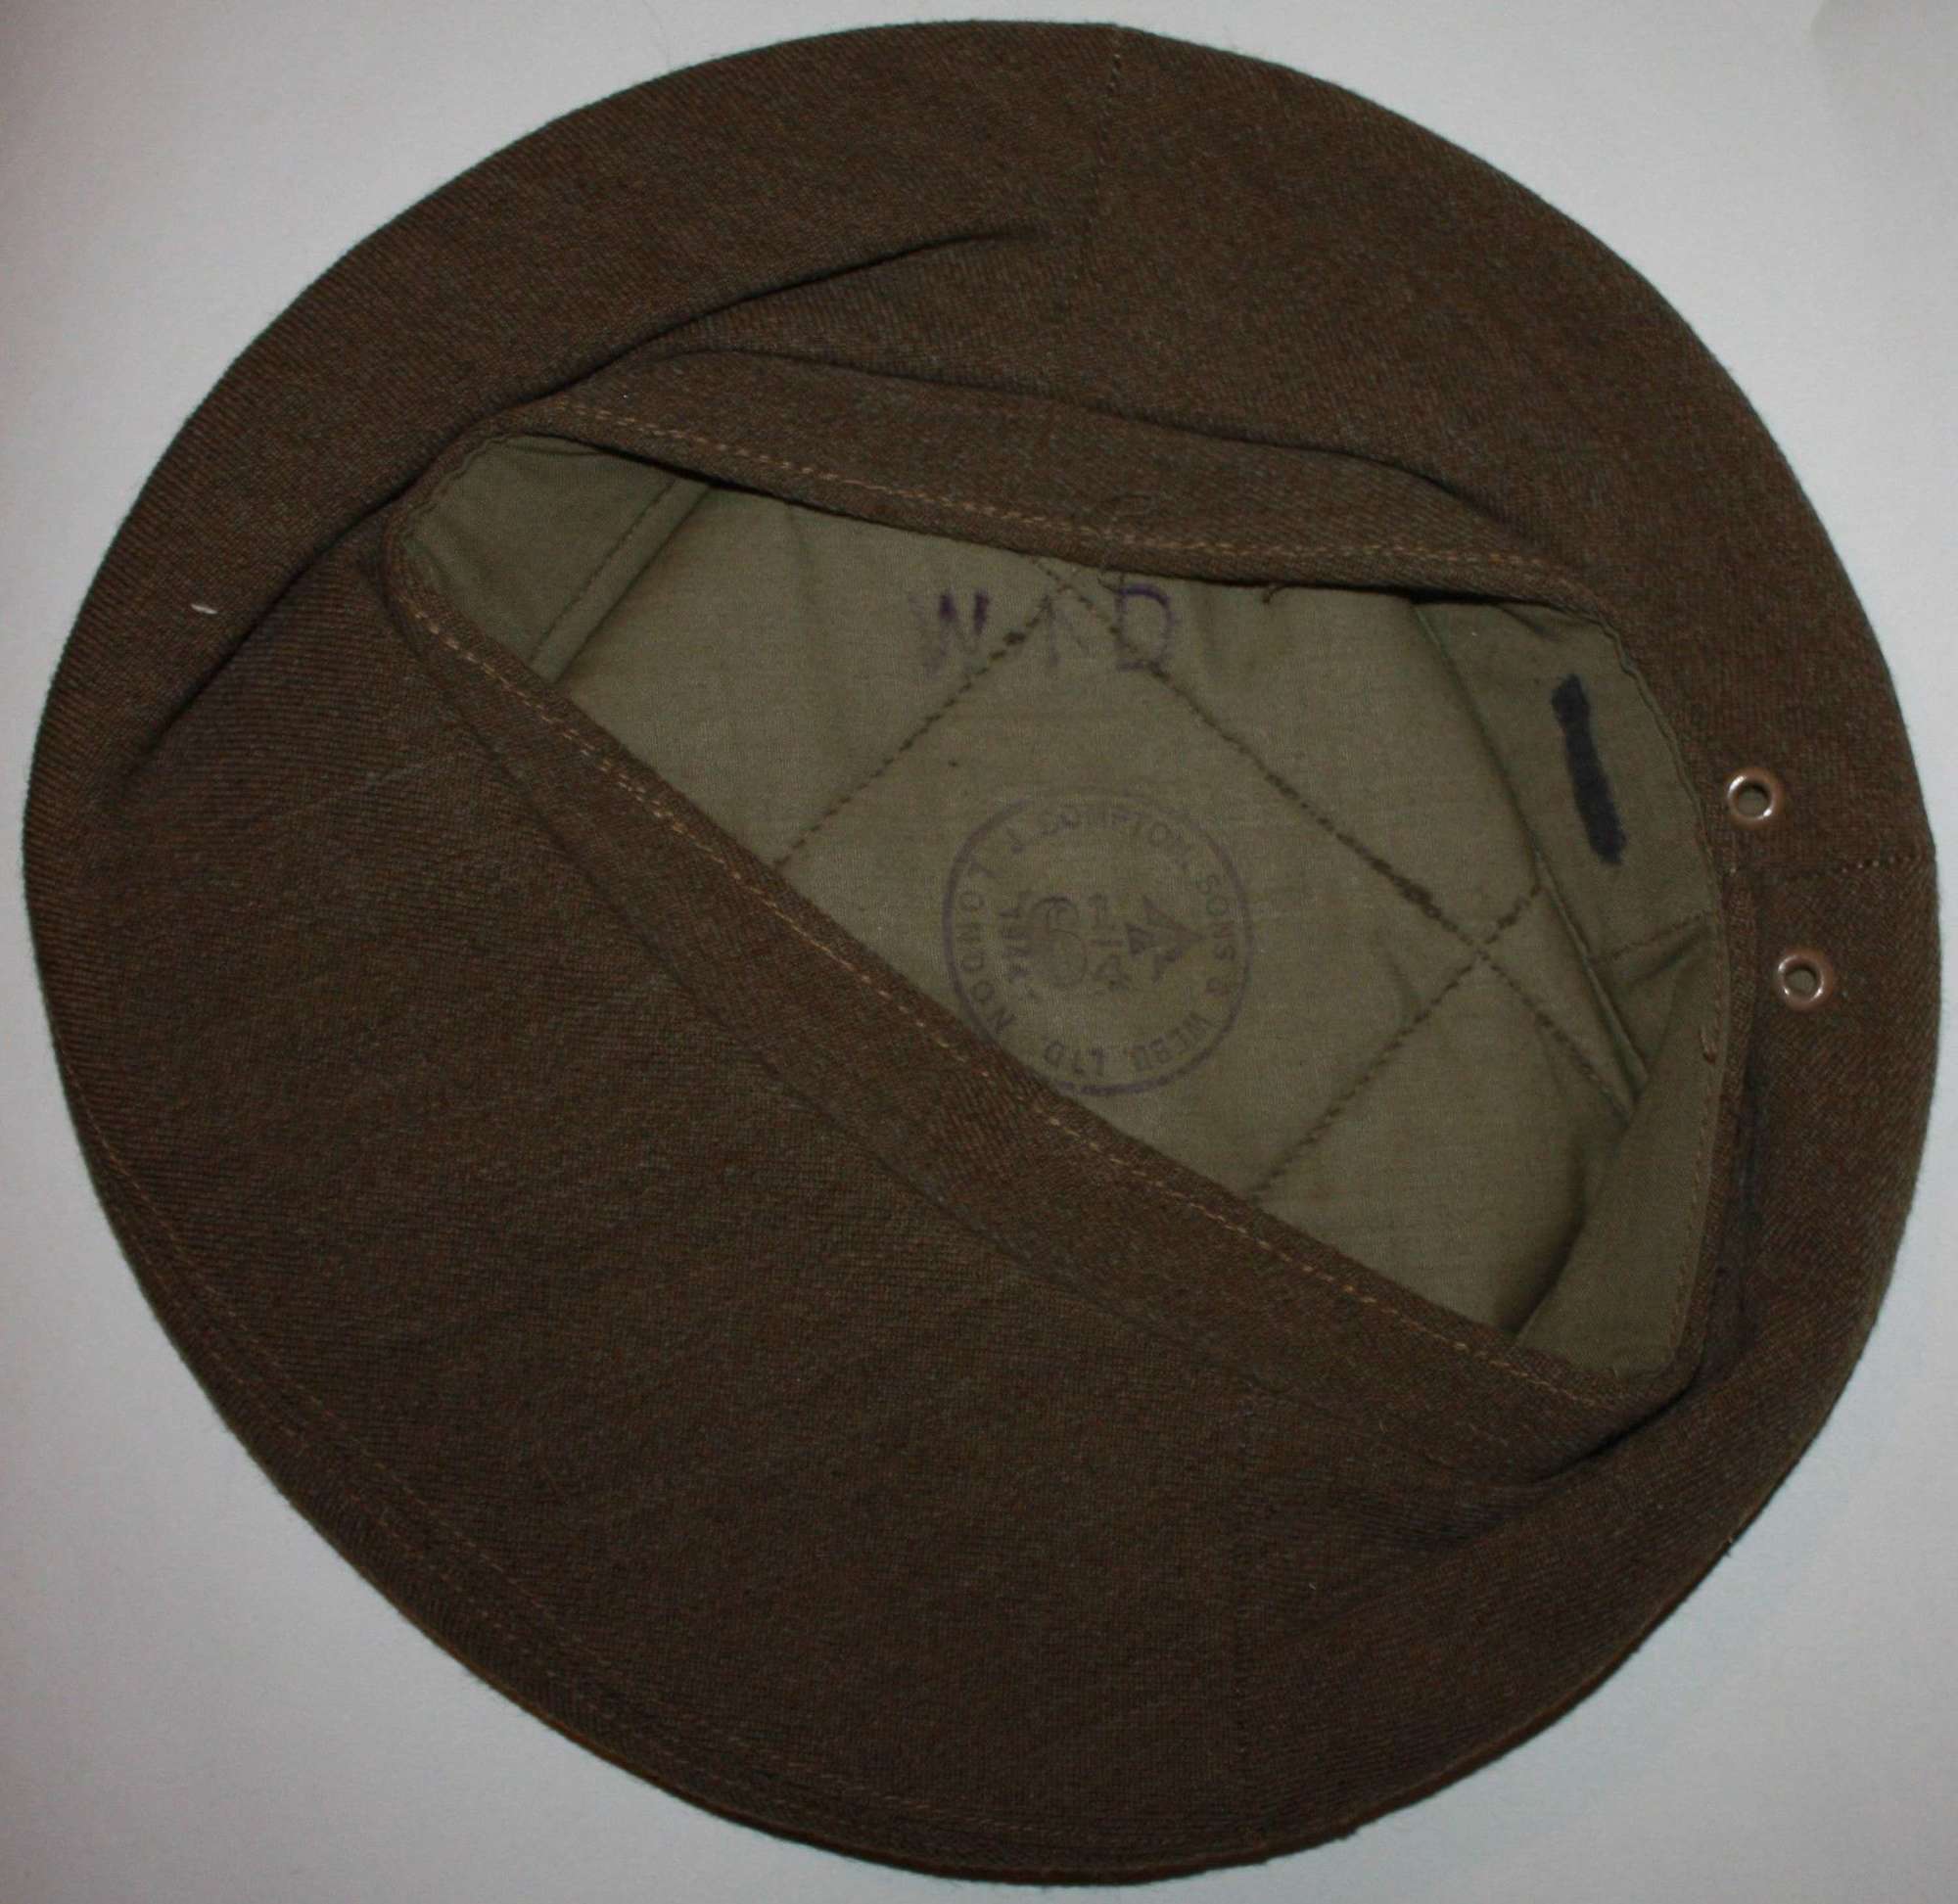 A SMALL SIZE 1945 DATED GS BERET  SIZE 6 1/4  VERY GOOD CONDITION